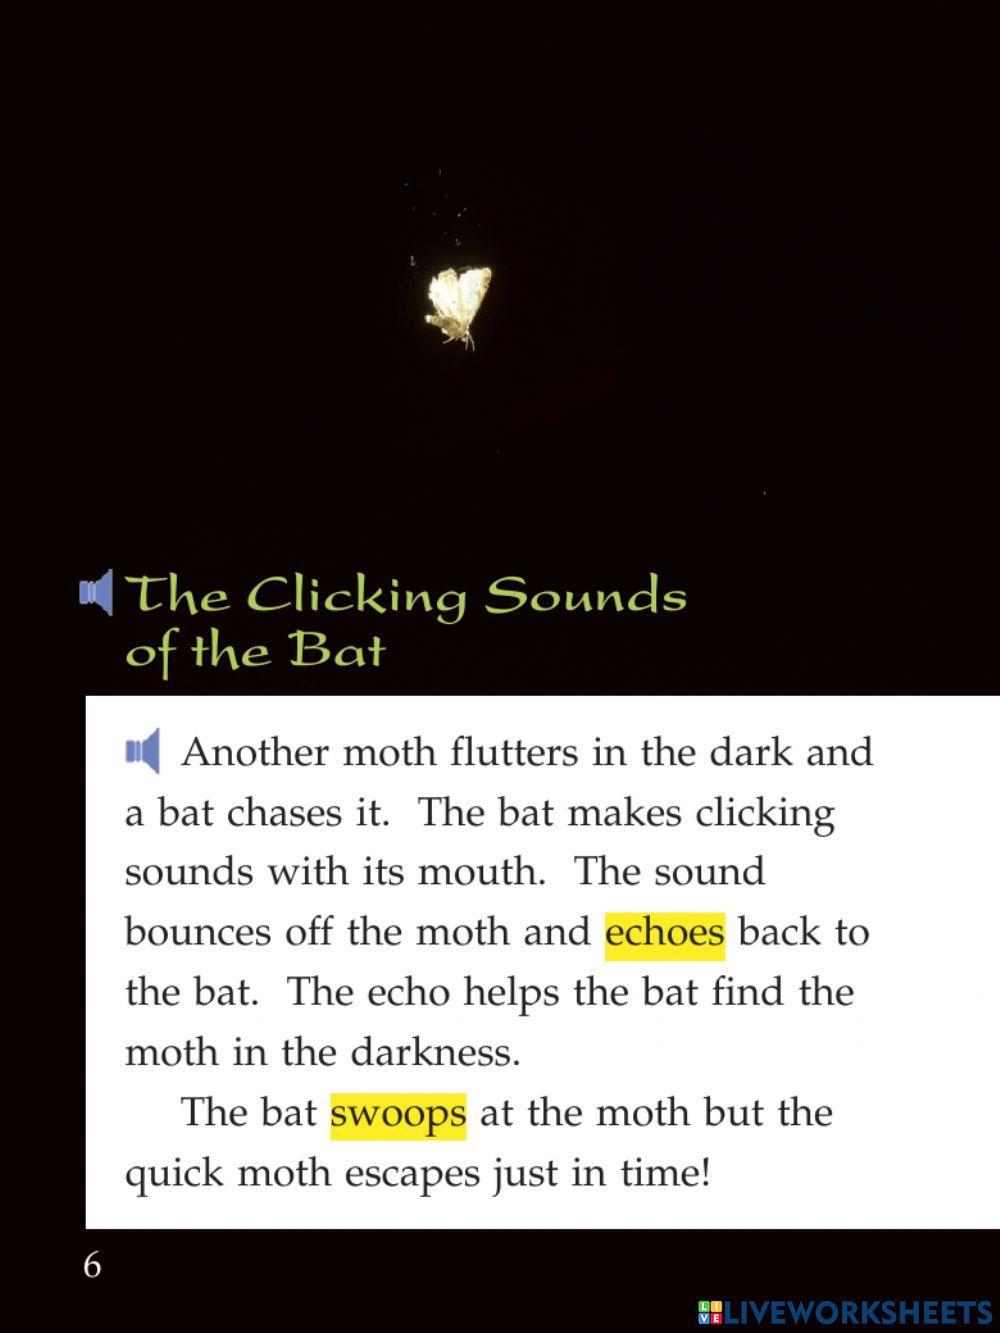 Chased by a bat